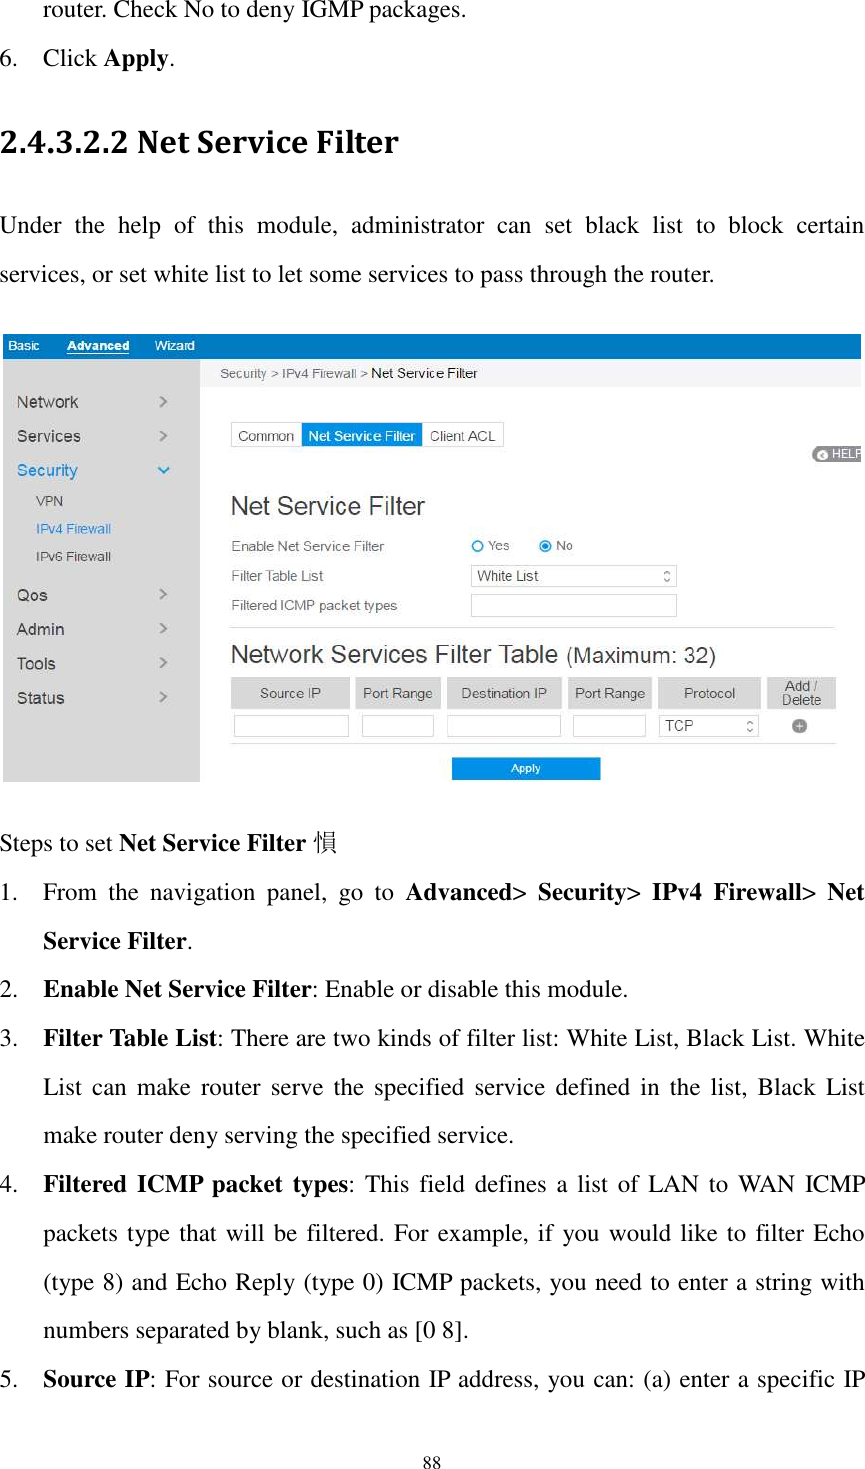  88 router. Check No to deny IGMP packages. 6. Click Apply. 2.4.3.2.2 Net Service Filter Under  the  help  of  this  module,  administrator  can  set  black  list  to  block  certain services, or set white list to let some services to pass through the router.    Steps to set Net Service Filter 愪 1. From  the  navigation  panel,  go  to  Advanced&gt;  Security&gt;  IPv4  Firewall&gt;  Net Service Filter. 2. Enable Net Service Filter: Enable or disable this module.   3. Filter Table List: There are two kinds of filter list: White List, Black List. White List can make  router  serve  the  specified  service  defined in the  list,  Black  List make router deny serving the specified service. 4. Filtered ICMP packet types: This  field defines a list of LAN to WAN  ICMP packets type that will be filtered. For example, if you would like to filter Echo (type 8) and Echo Reply (type 0) ICMP packets, you need to enter a string with numbers separated by blank, such as [0 8]. 5. Source IP: For source or destination IP address, you can: (a) enter a specific IP 